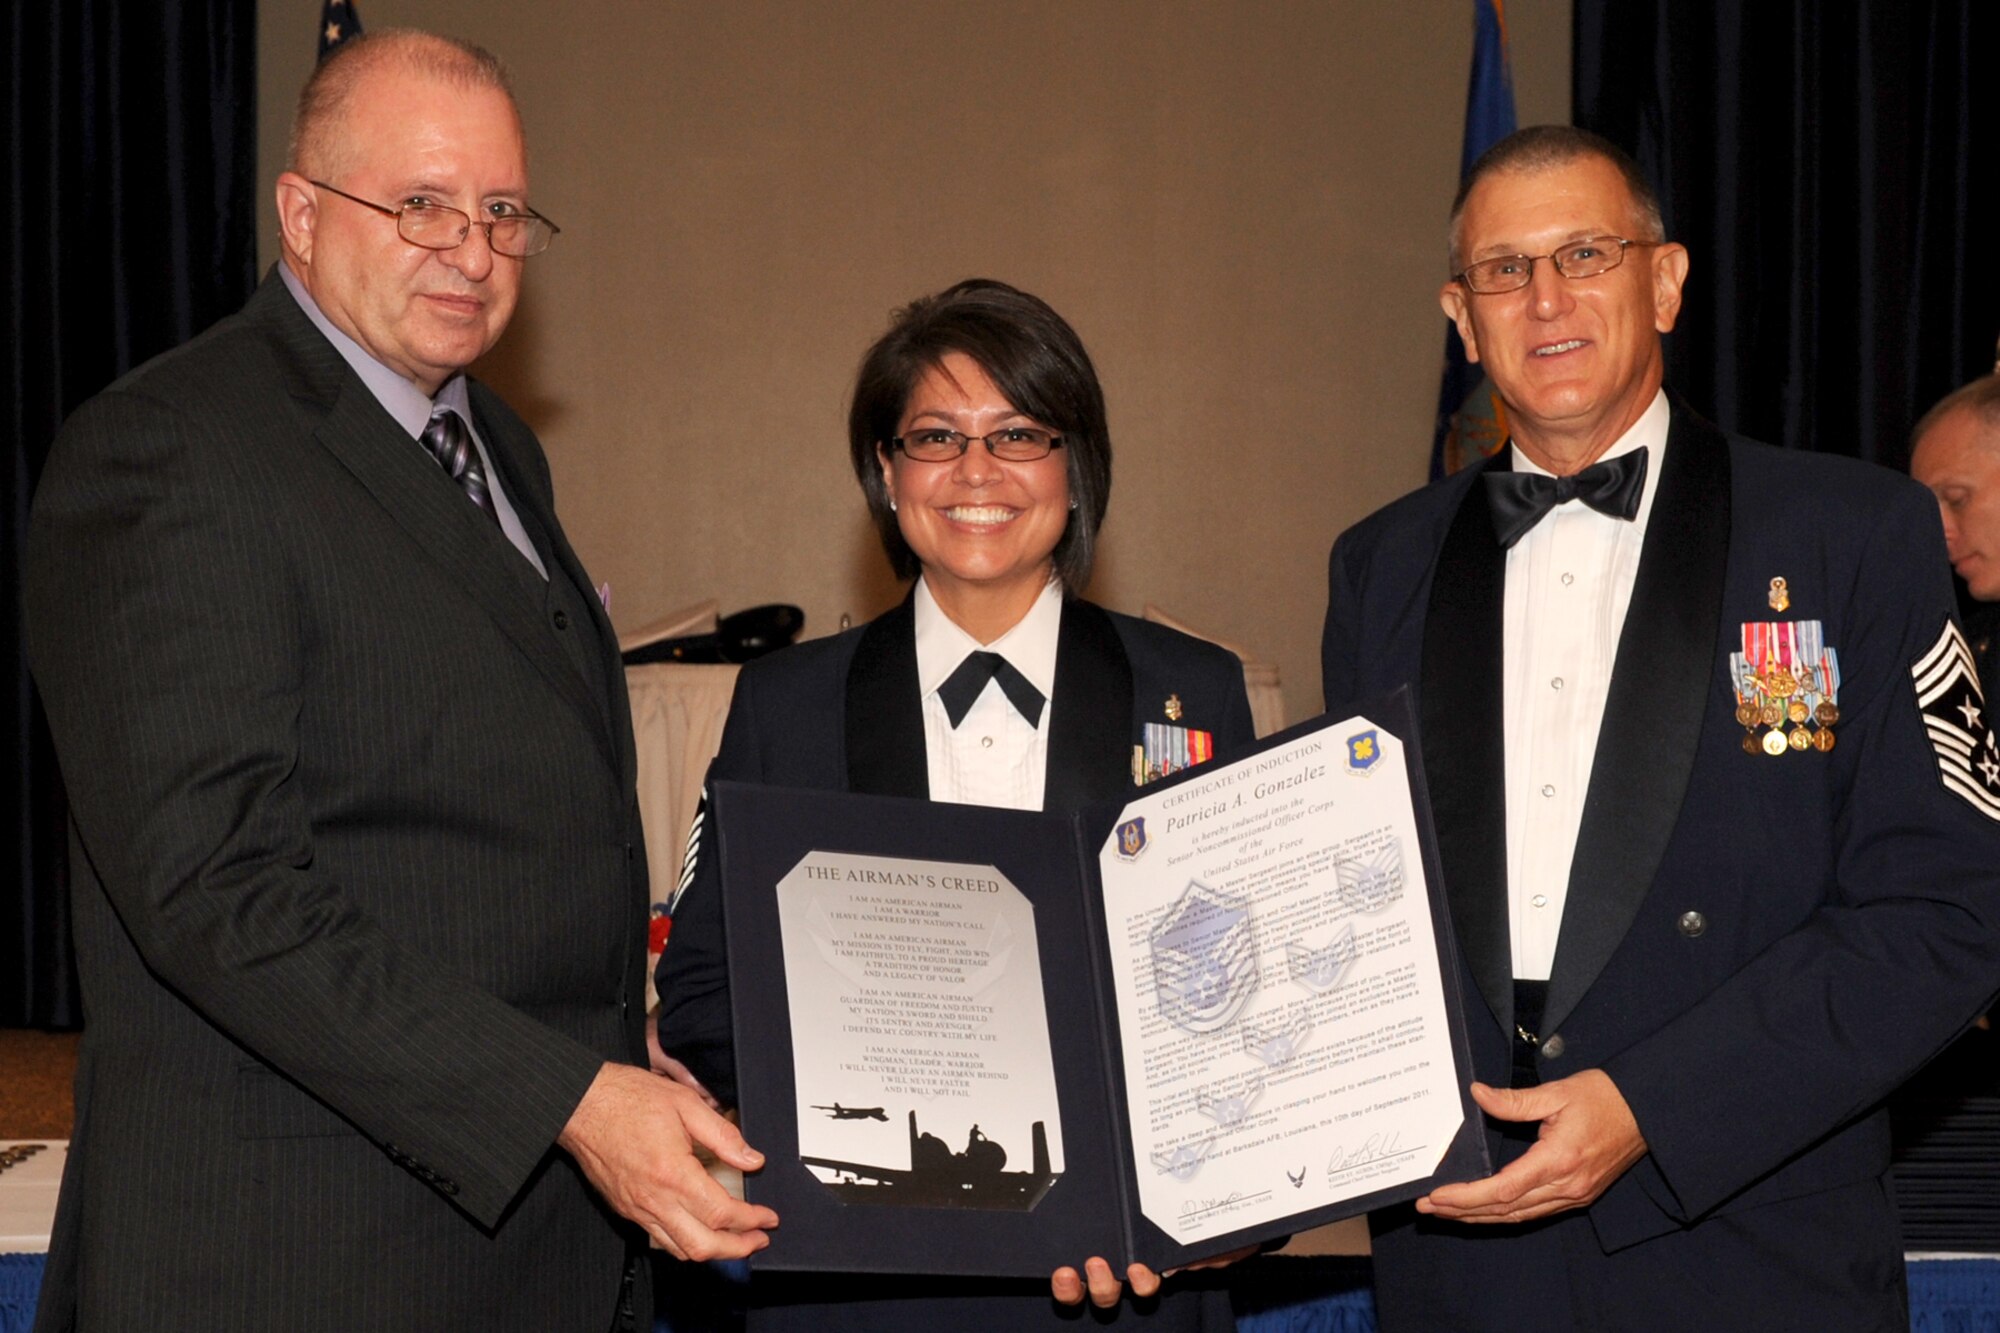 U.S. Air Force Master Sgt. Partricia Gonzales is presented the Certificate of Induction by retired Chief Master Sgt. Larry Payne and Chief Master Sgt. Keith St. Aubin, 307th Bomb Wing (BW) command chief, during the Senior Noncommisioned Officer Induction Ceremony at Barksdale Air Force Base, La., Sept. 10, 2011. The ceremony is held annually to recognize newly promoted Master Sgts. within the 307th BW, 917th Fighter Group and the 307th Rapid Engineer Deployable Heavy Operations Repair Squadron Engineers. (U.S. Air Force photo by Master Sgt. Greg Steele/Released)